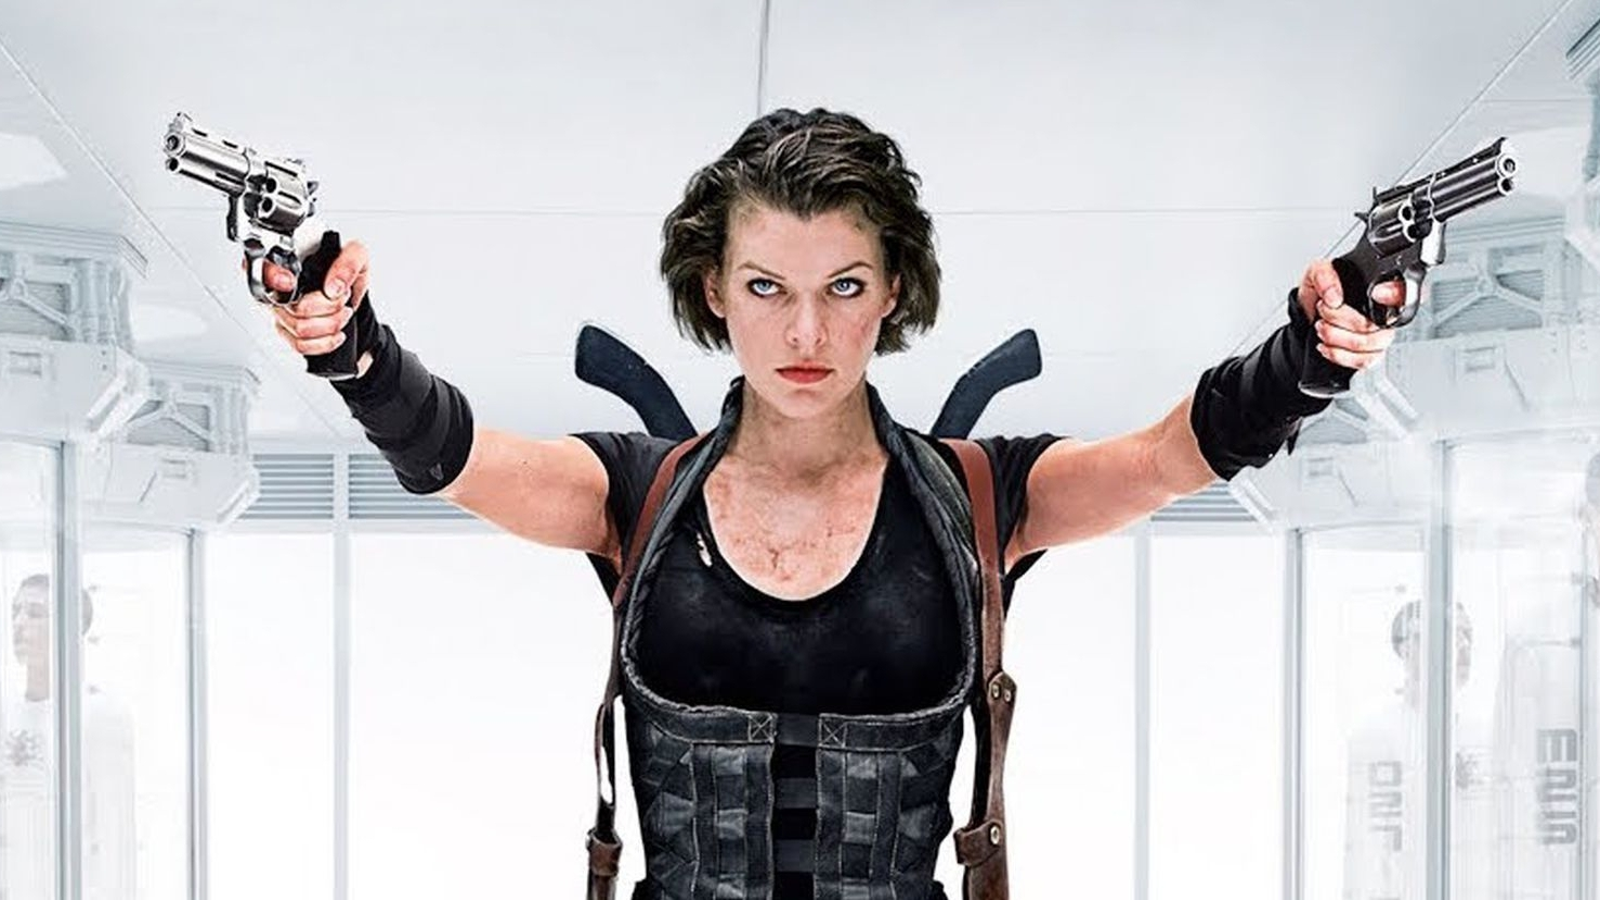 Resident Evil movie sequel in the works, will be filmed in 3D